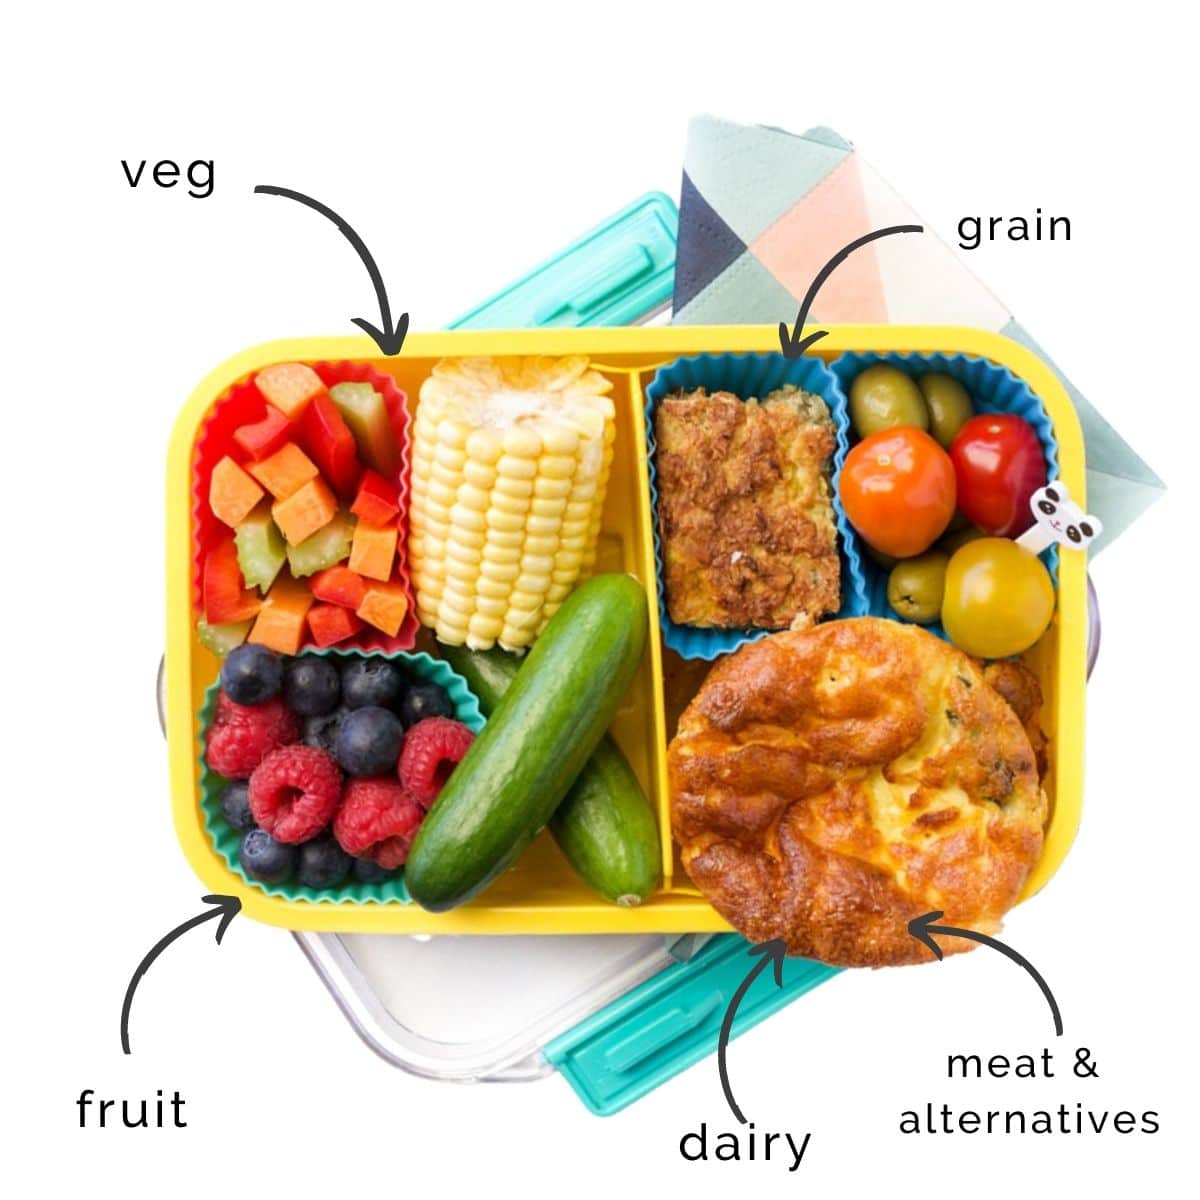 Yellow Plastic Lunchbox Filled with Crustless Quiche, Banana Bread, Chopped Vegetables, Corn on Cob and Mixed Berries